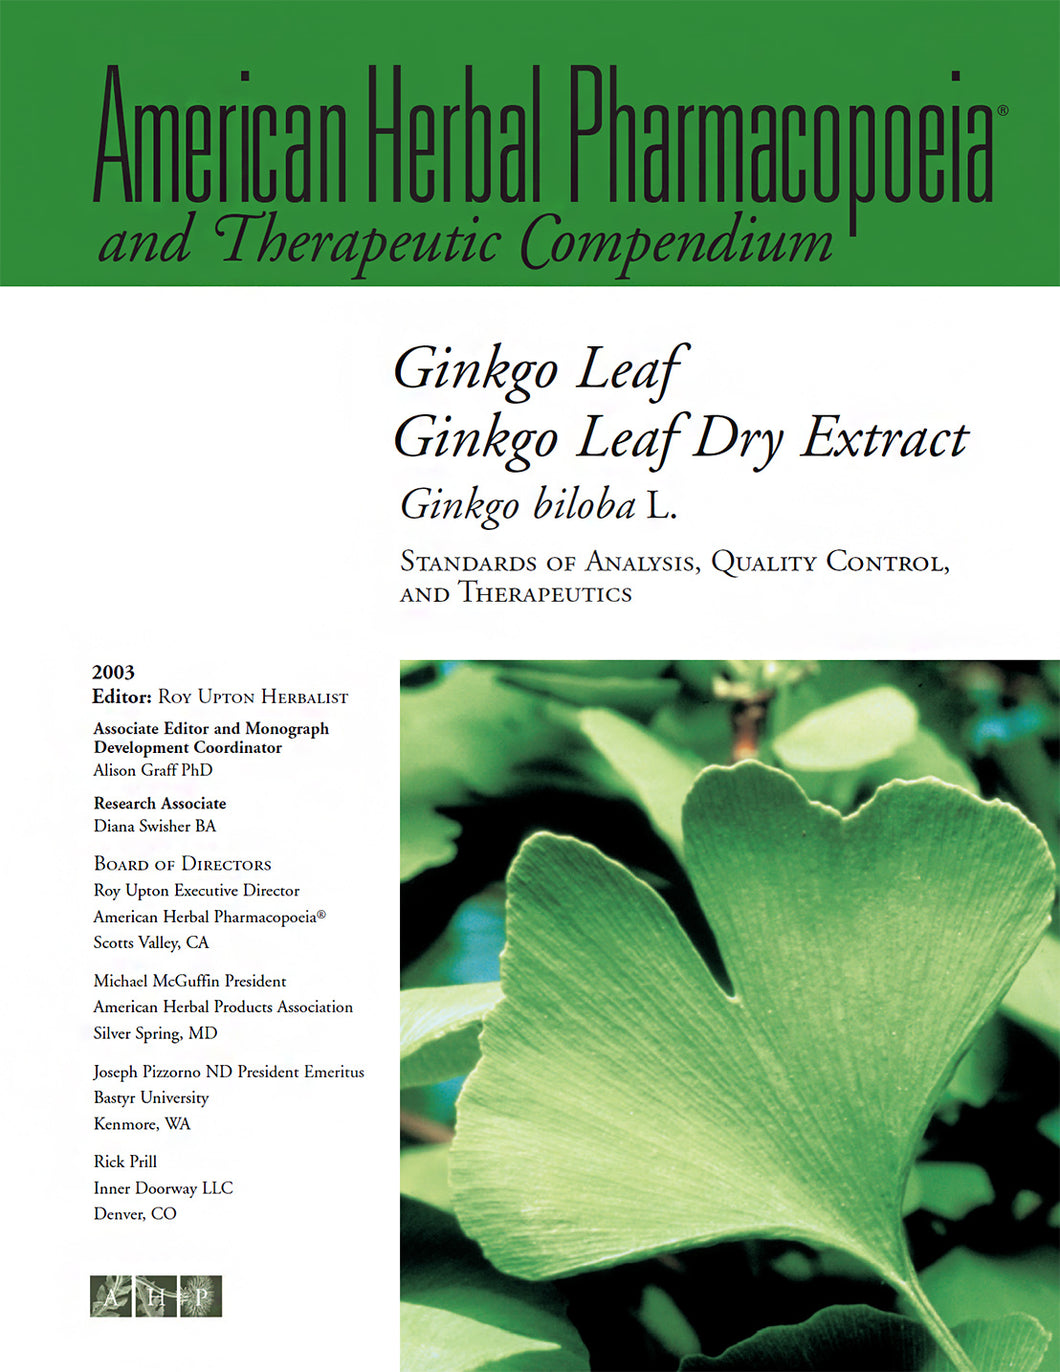 Ginkgo Leaf and Dry Extract